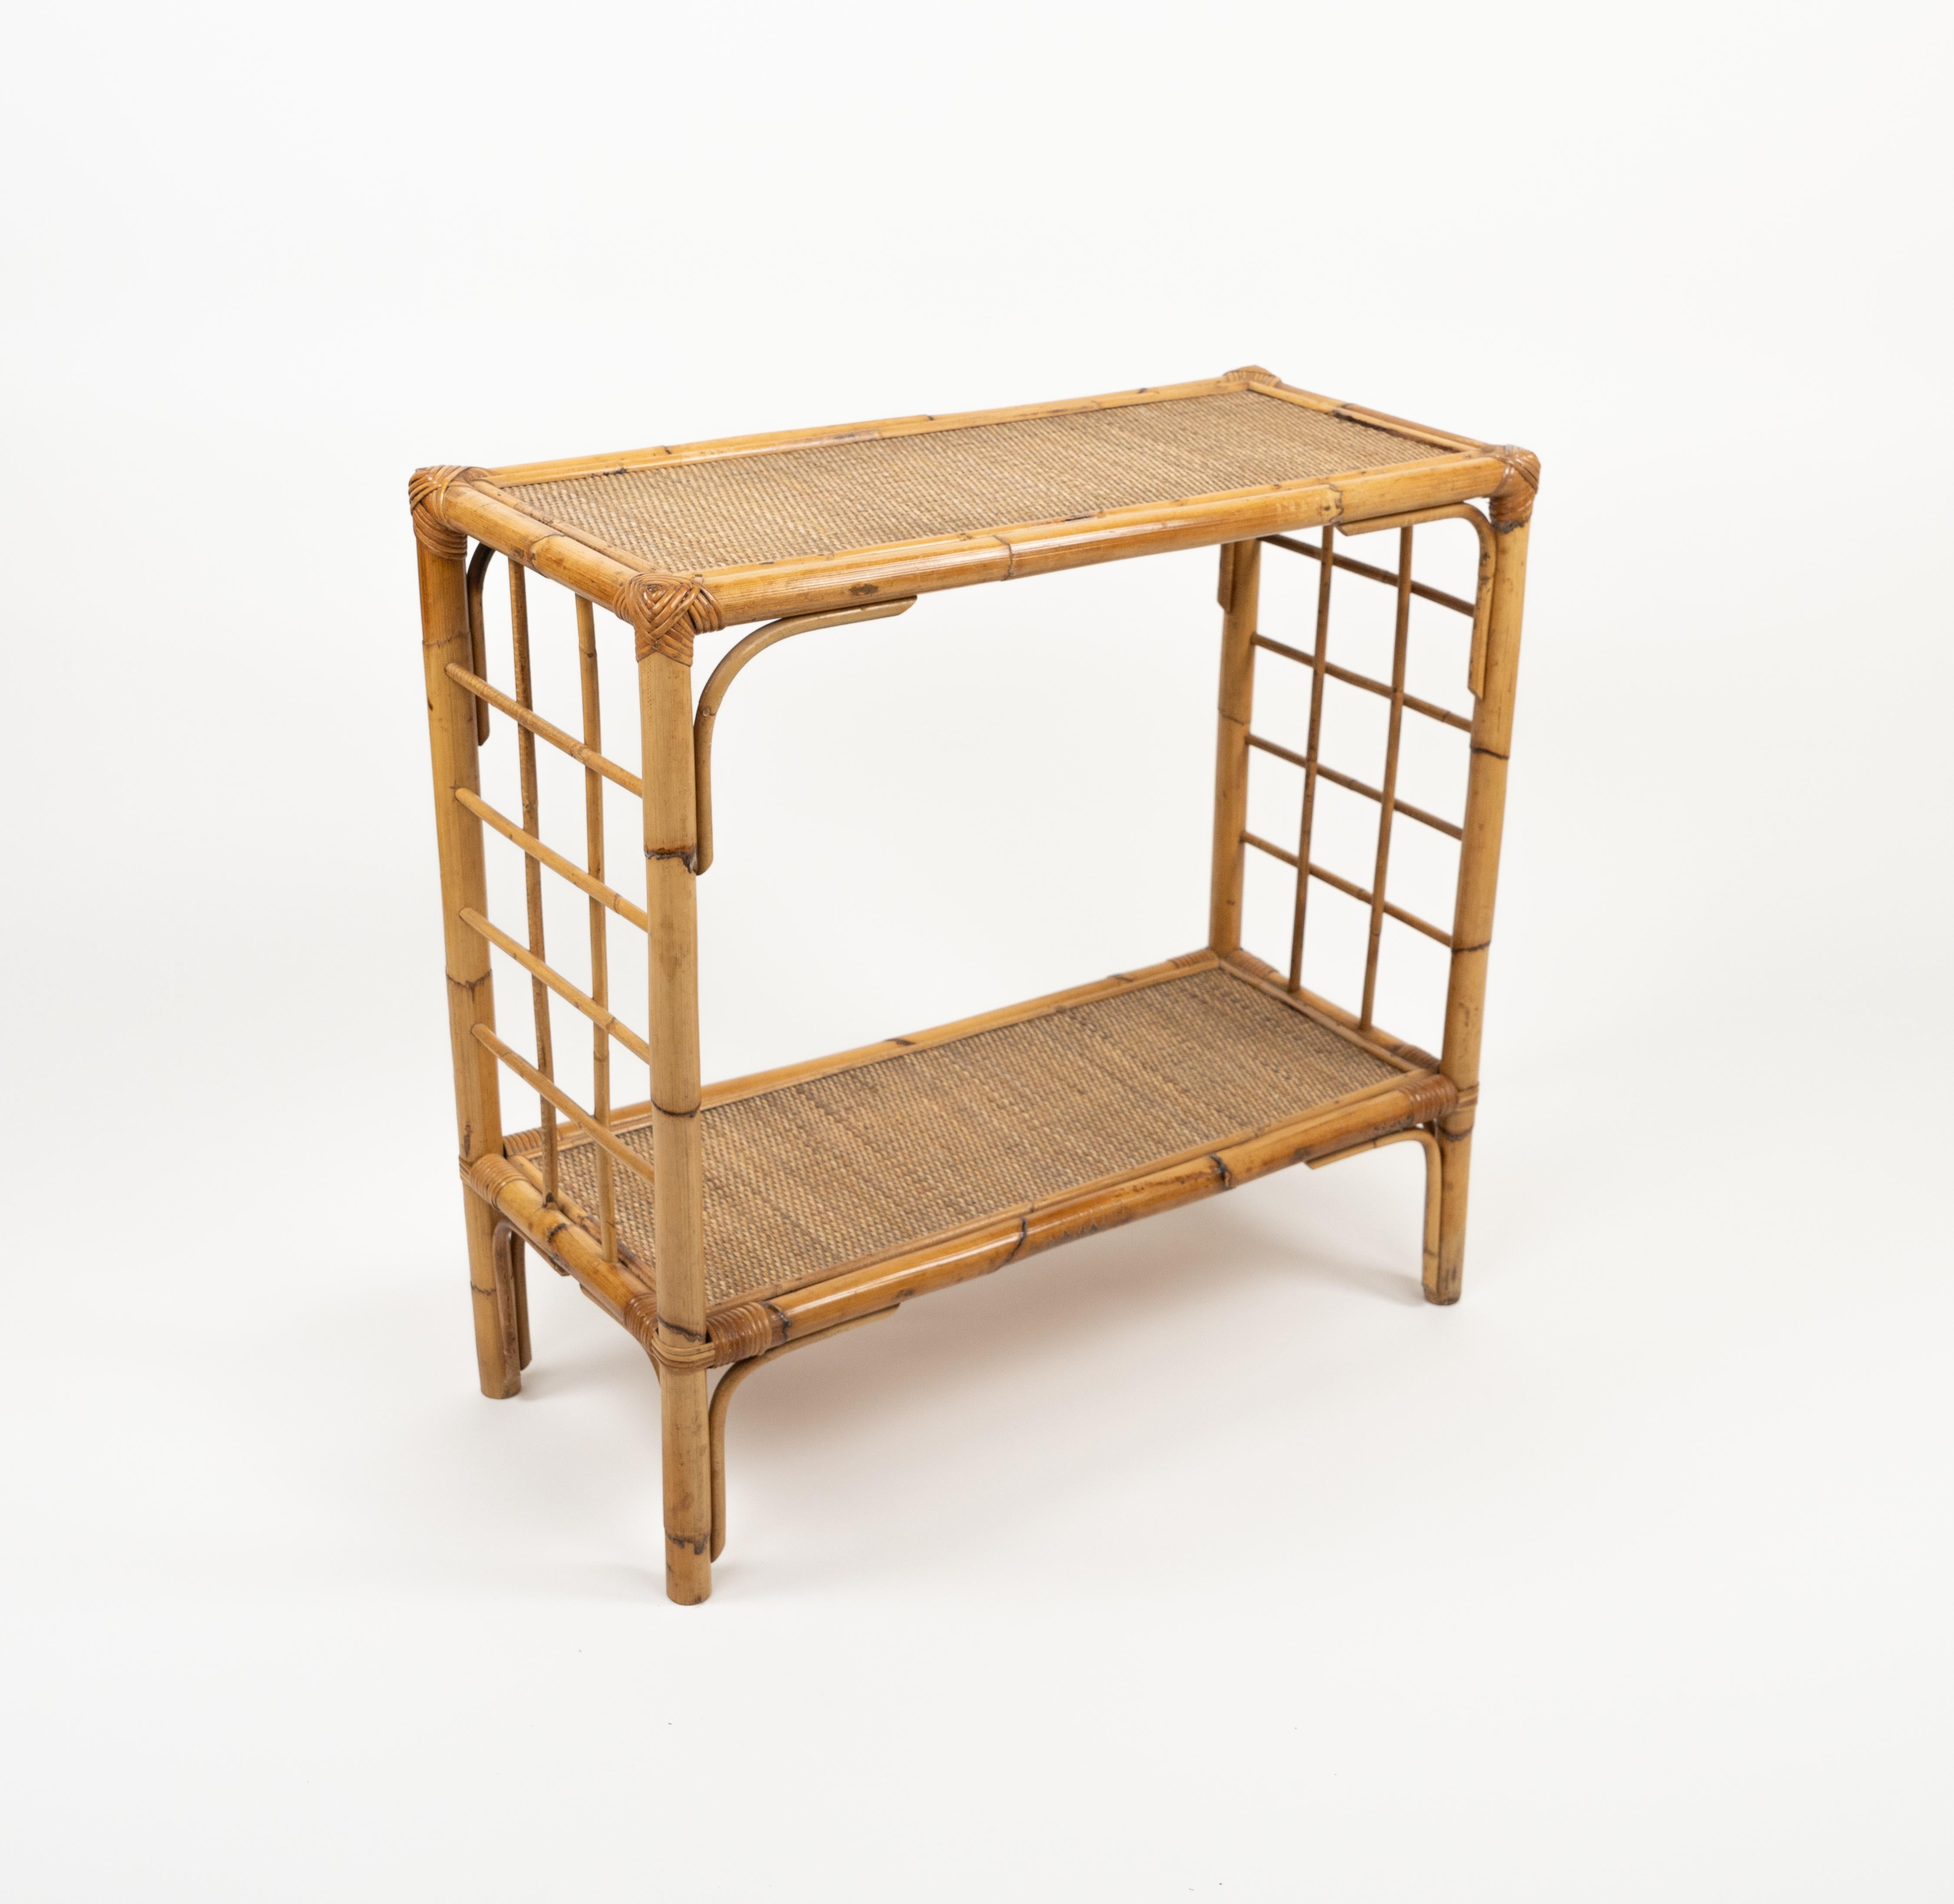 Midcentury beautiful console table in rattan and bamboo.

Made in Italy in the 1970s.
